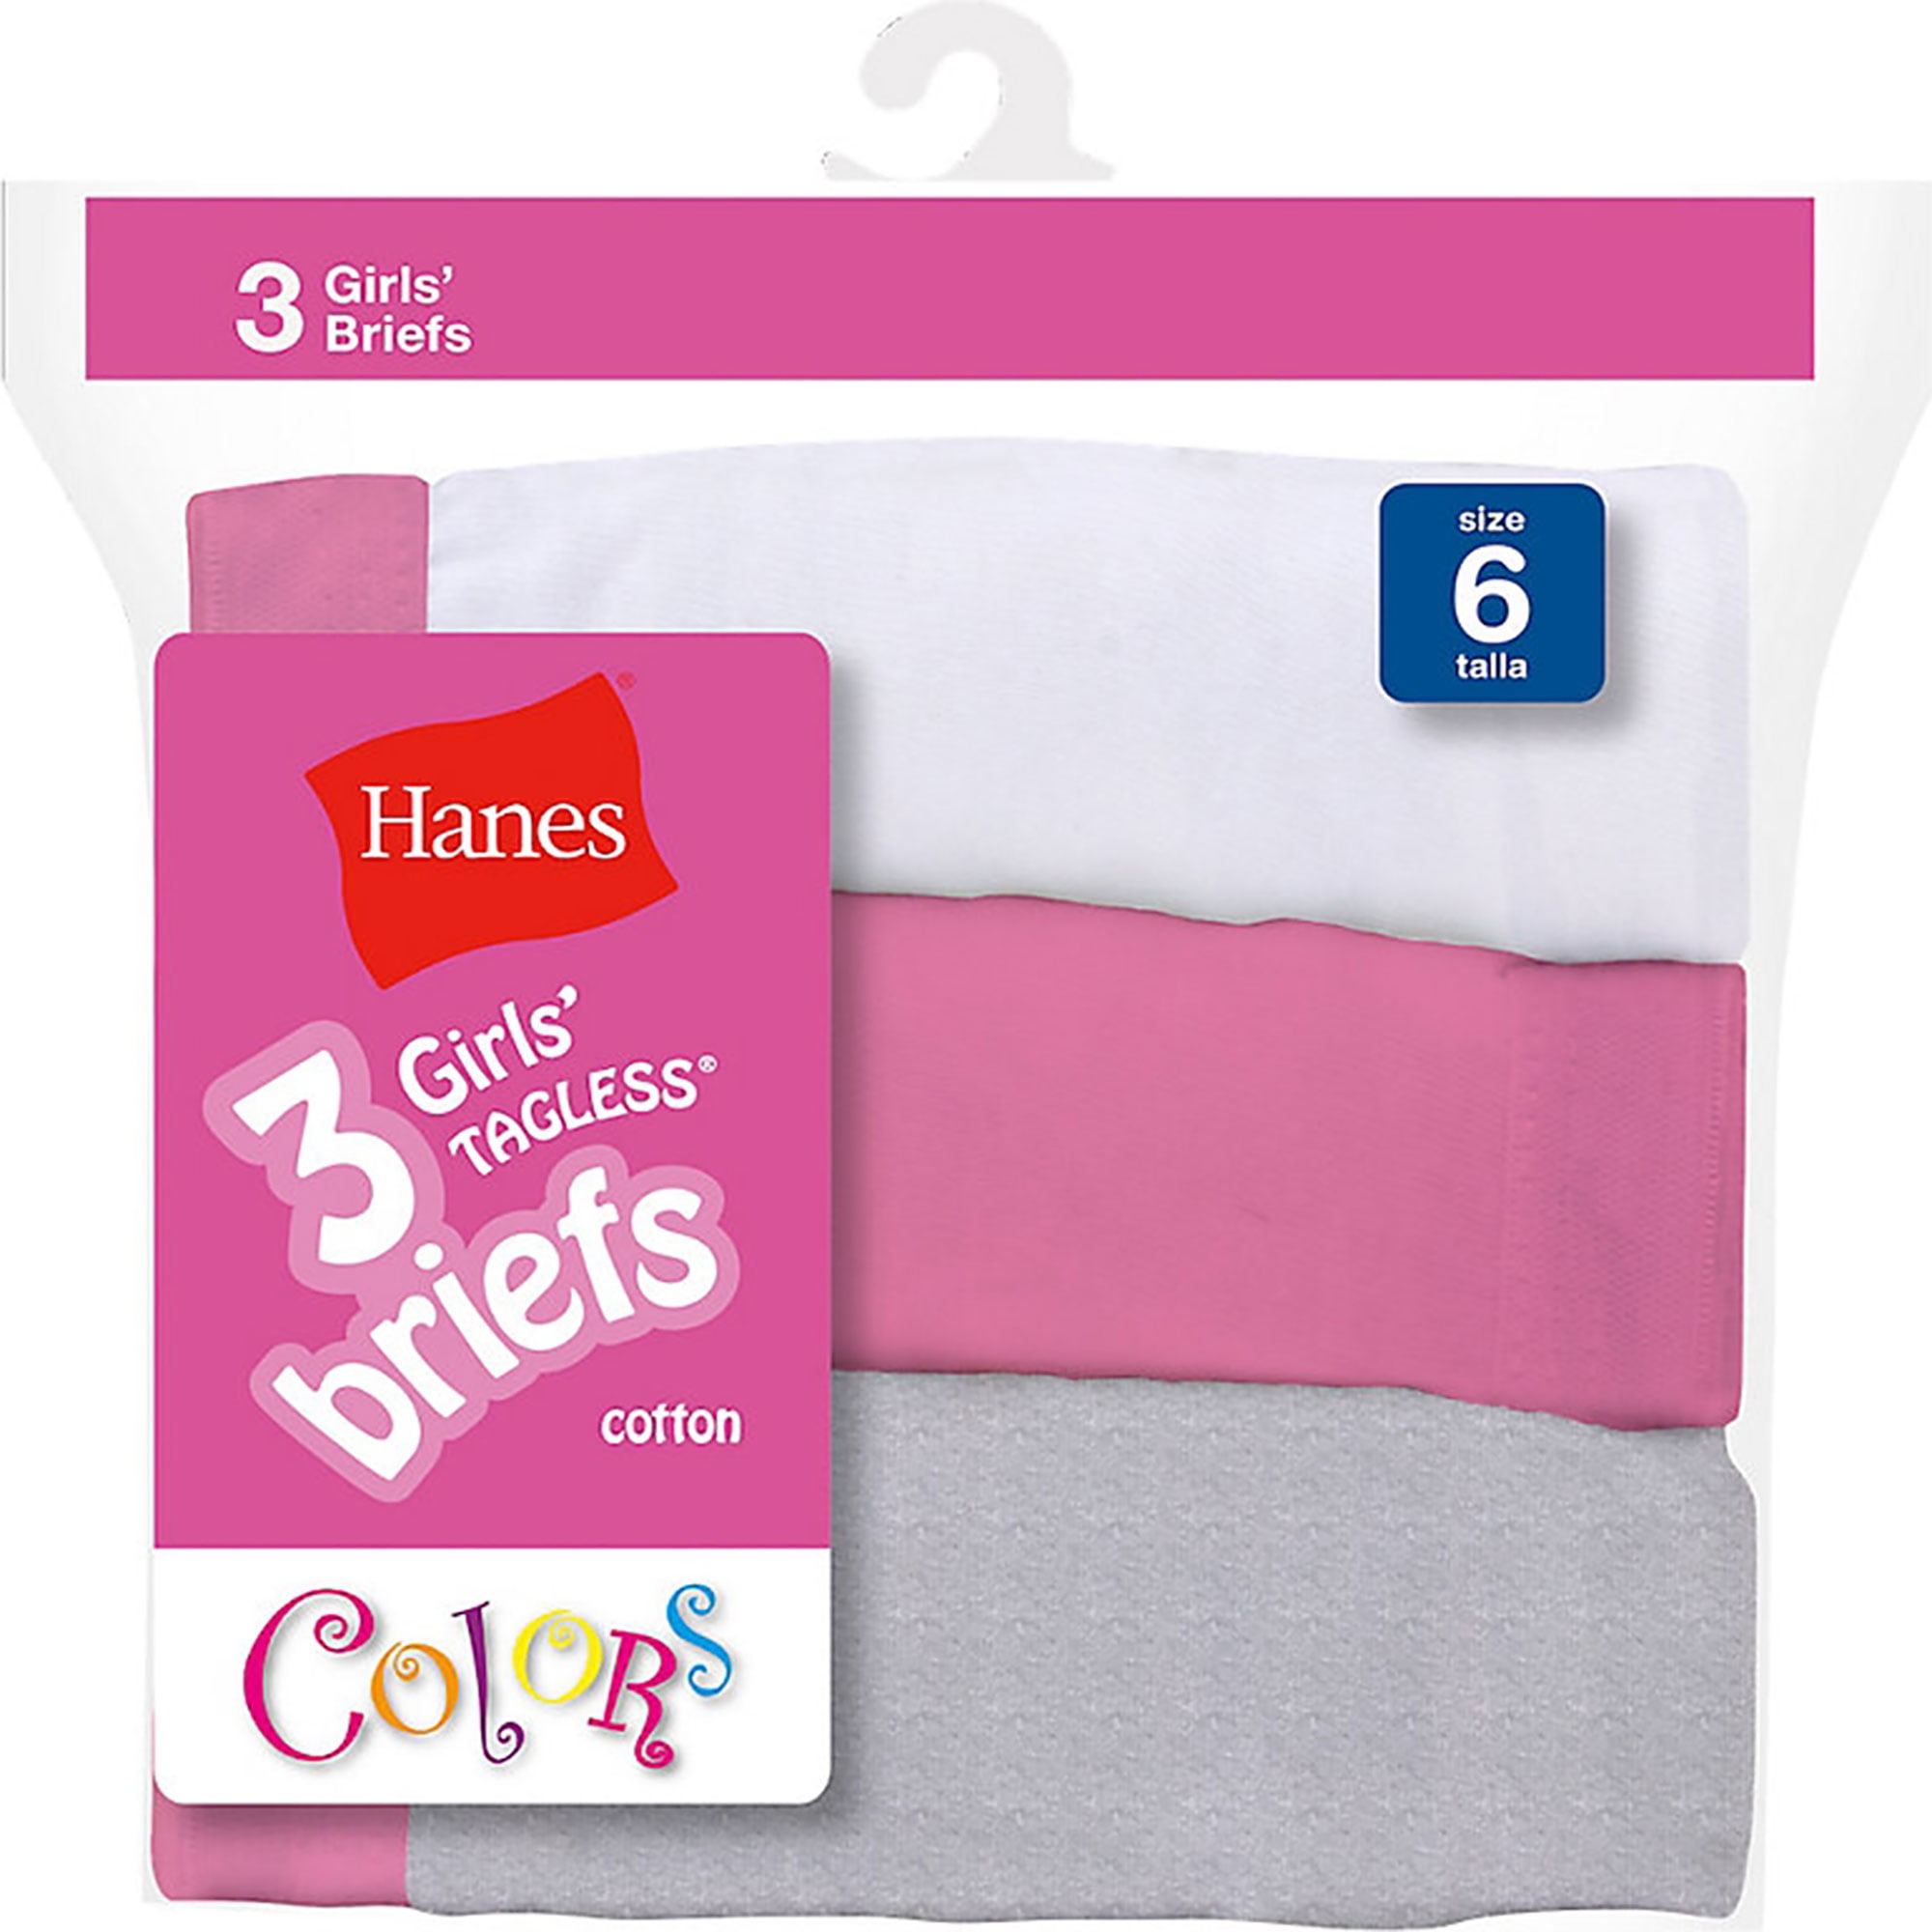  Hanes Girls' No Ride Up Cotton Colored Briefs 3-Pack